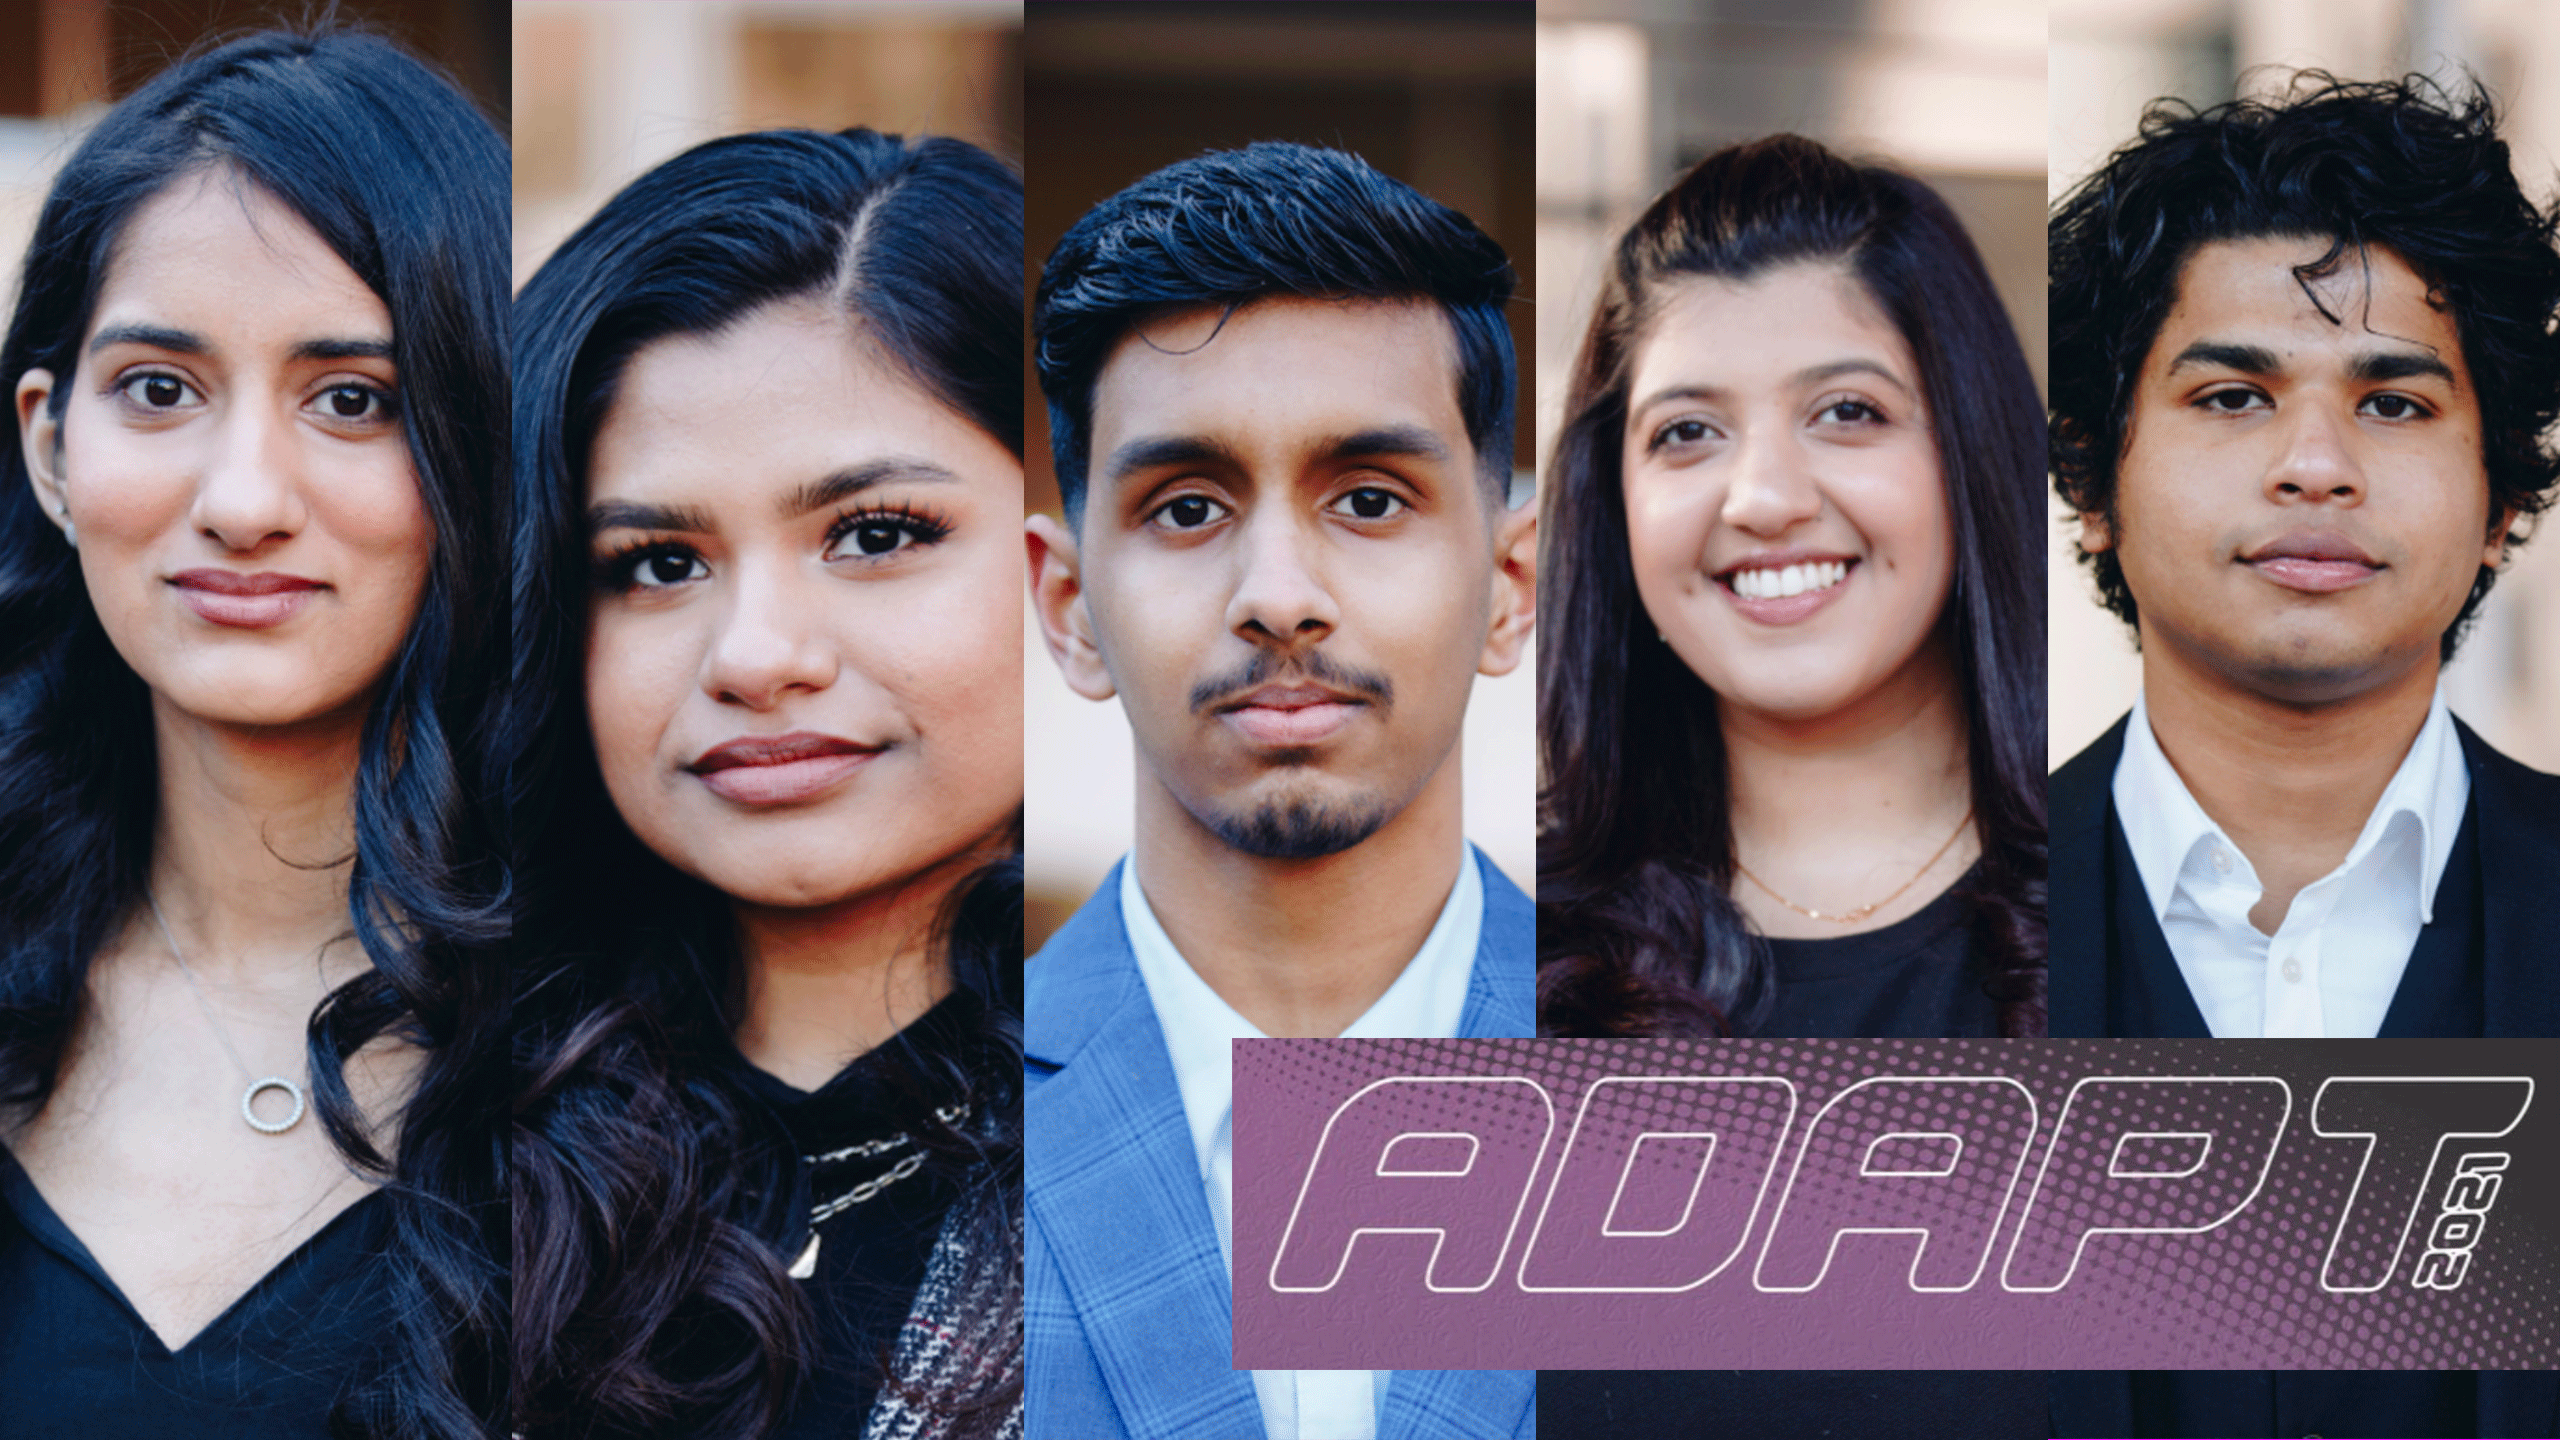 Five students running for the Adapt slate in the RSU elections. Logo in the bottom right corner that has white outlined text that reads "Adapt" in all caps on a purple background.